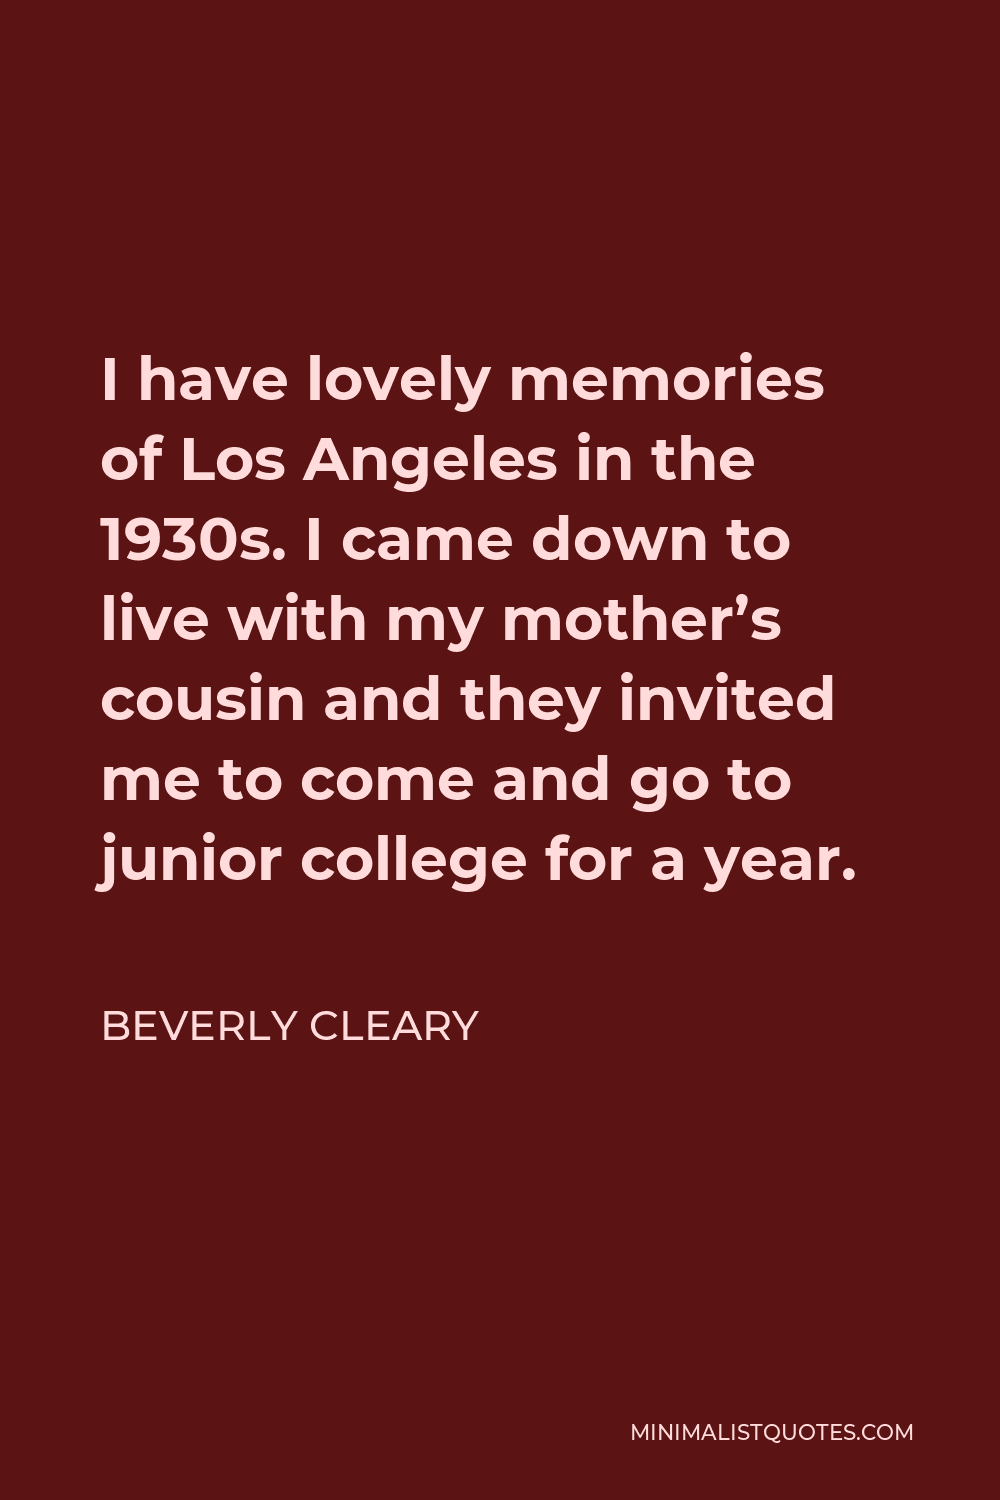 Beverly Cleary Quote - I have lovely memories of Los Angeles in the 1930s. I came down to live with my mother’s cousin and they invited me to come and go to junior college for a year.